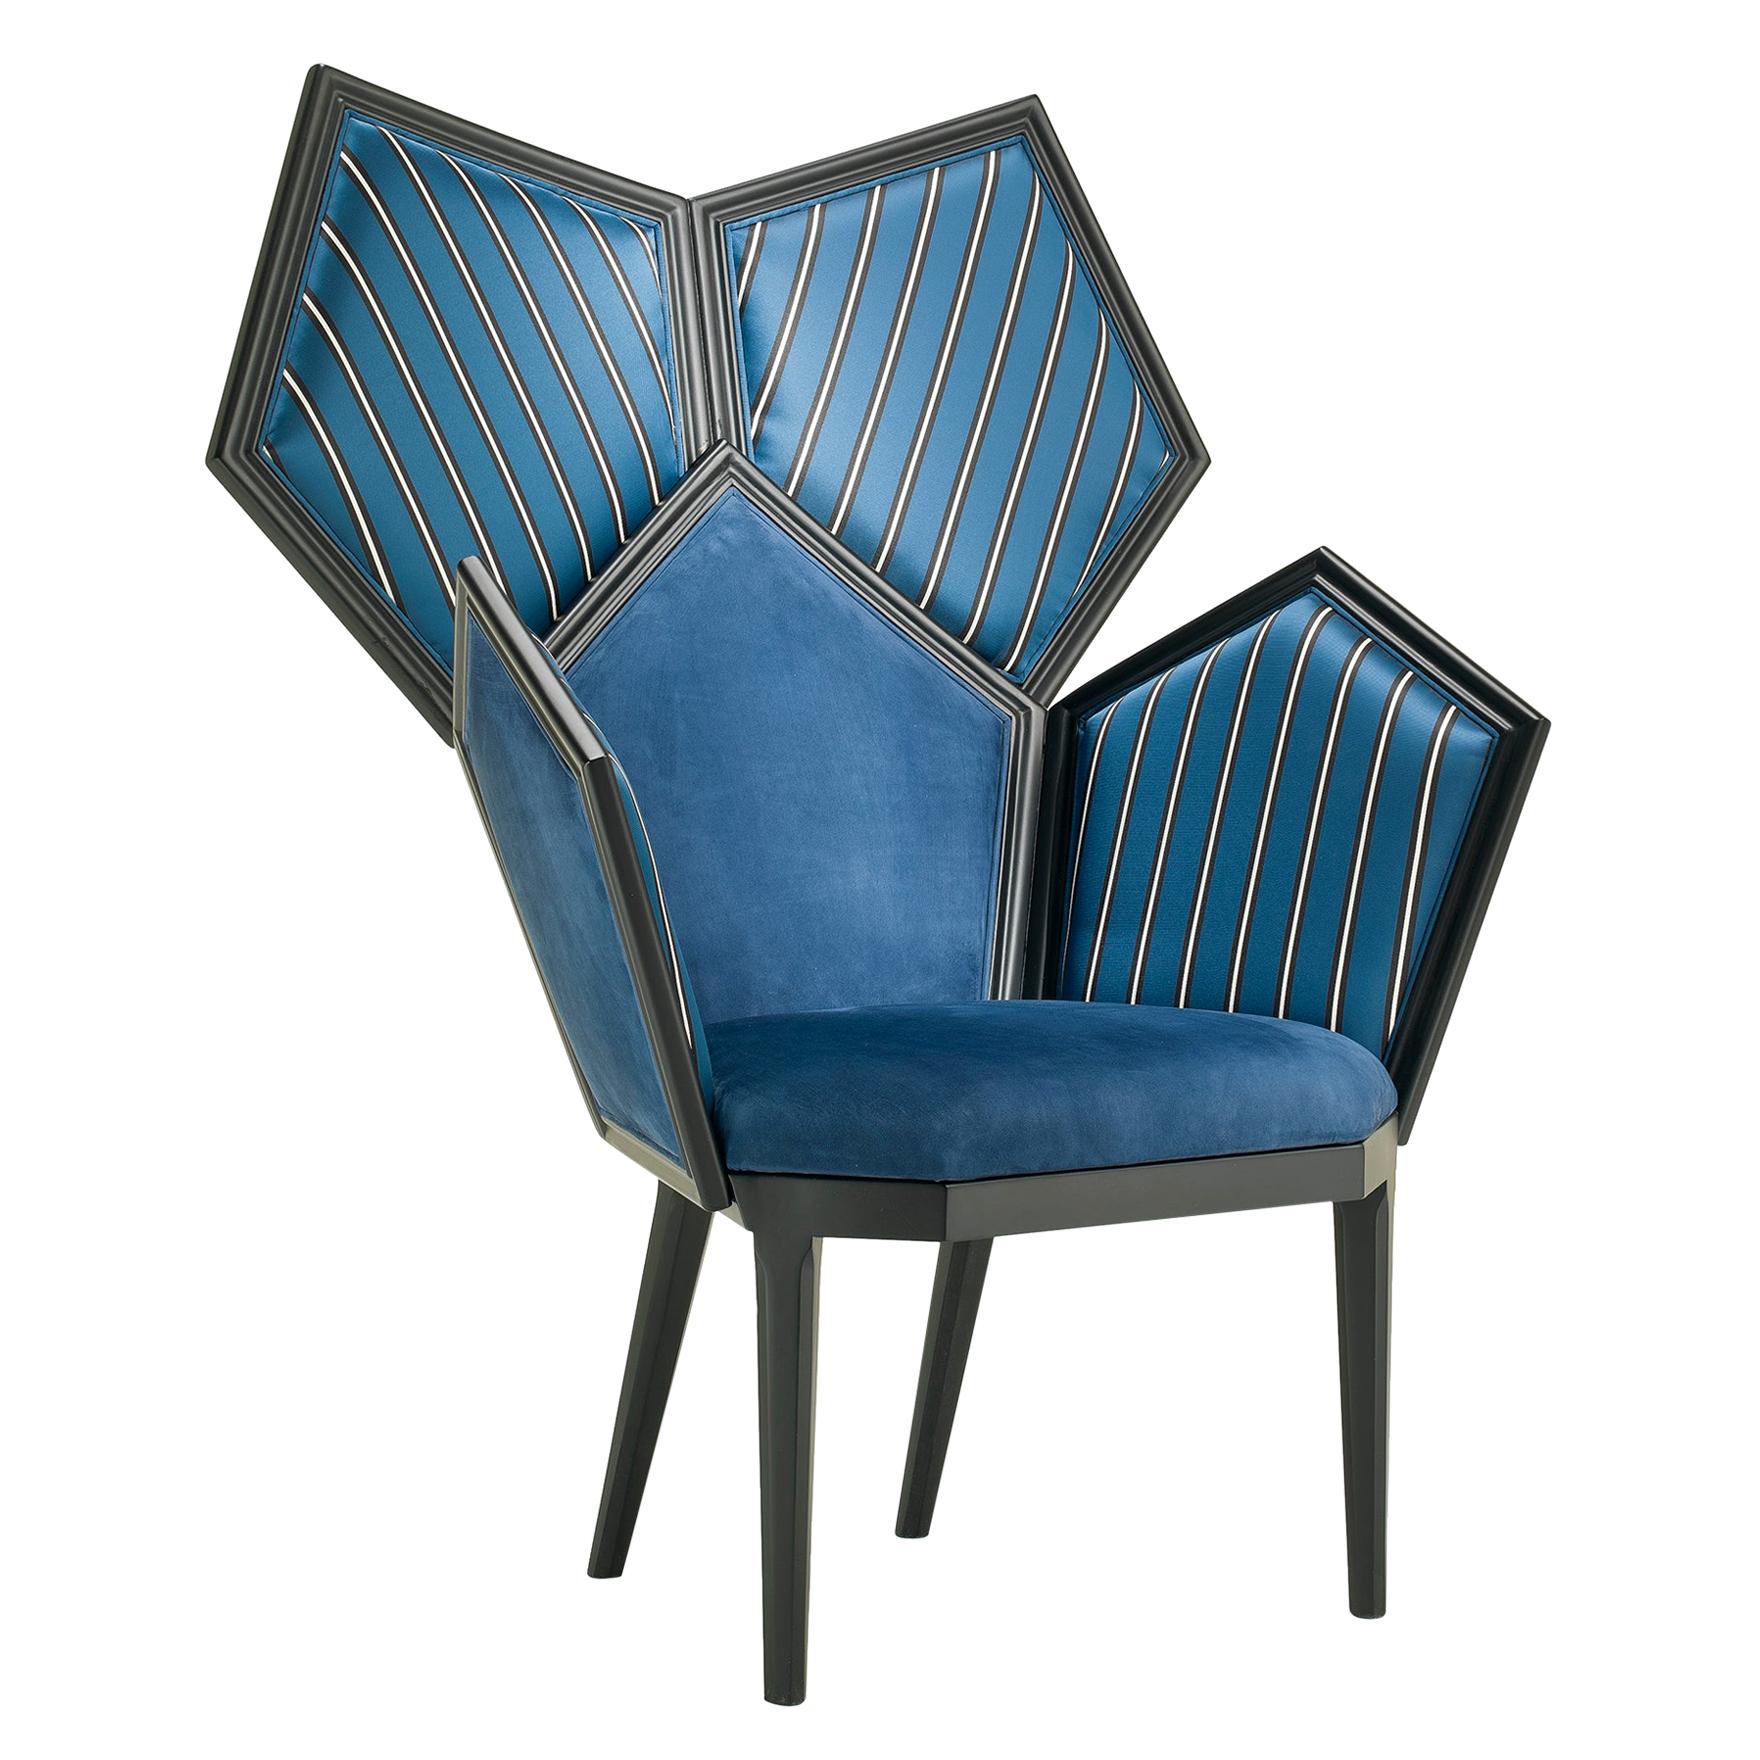 LUI 5/A Blue Upholstered and Lacquered Armchair Composed of Pentagons